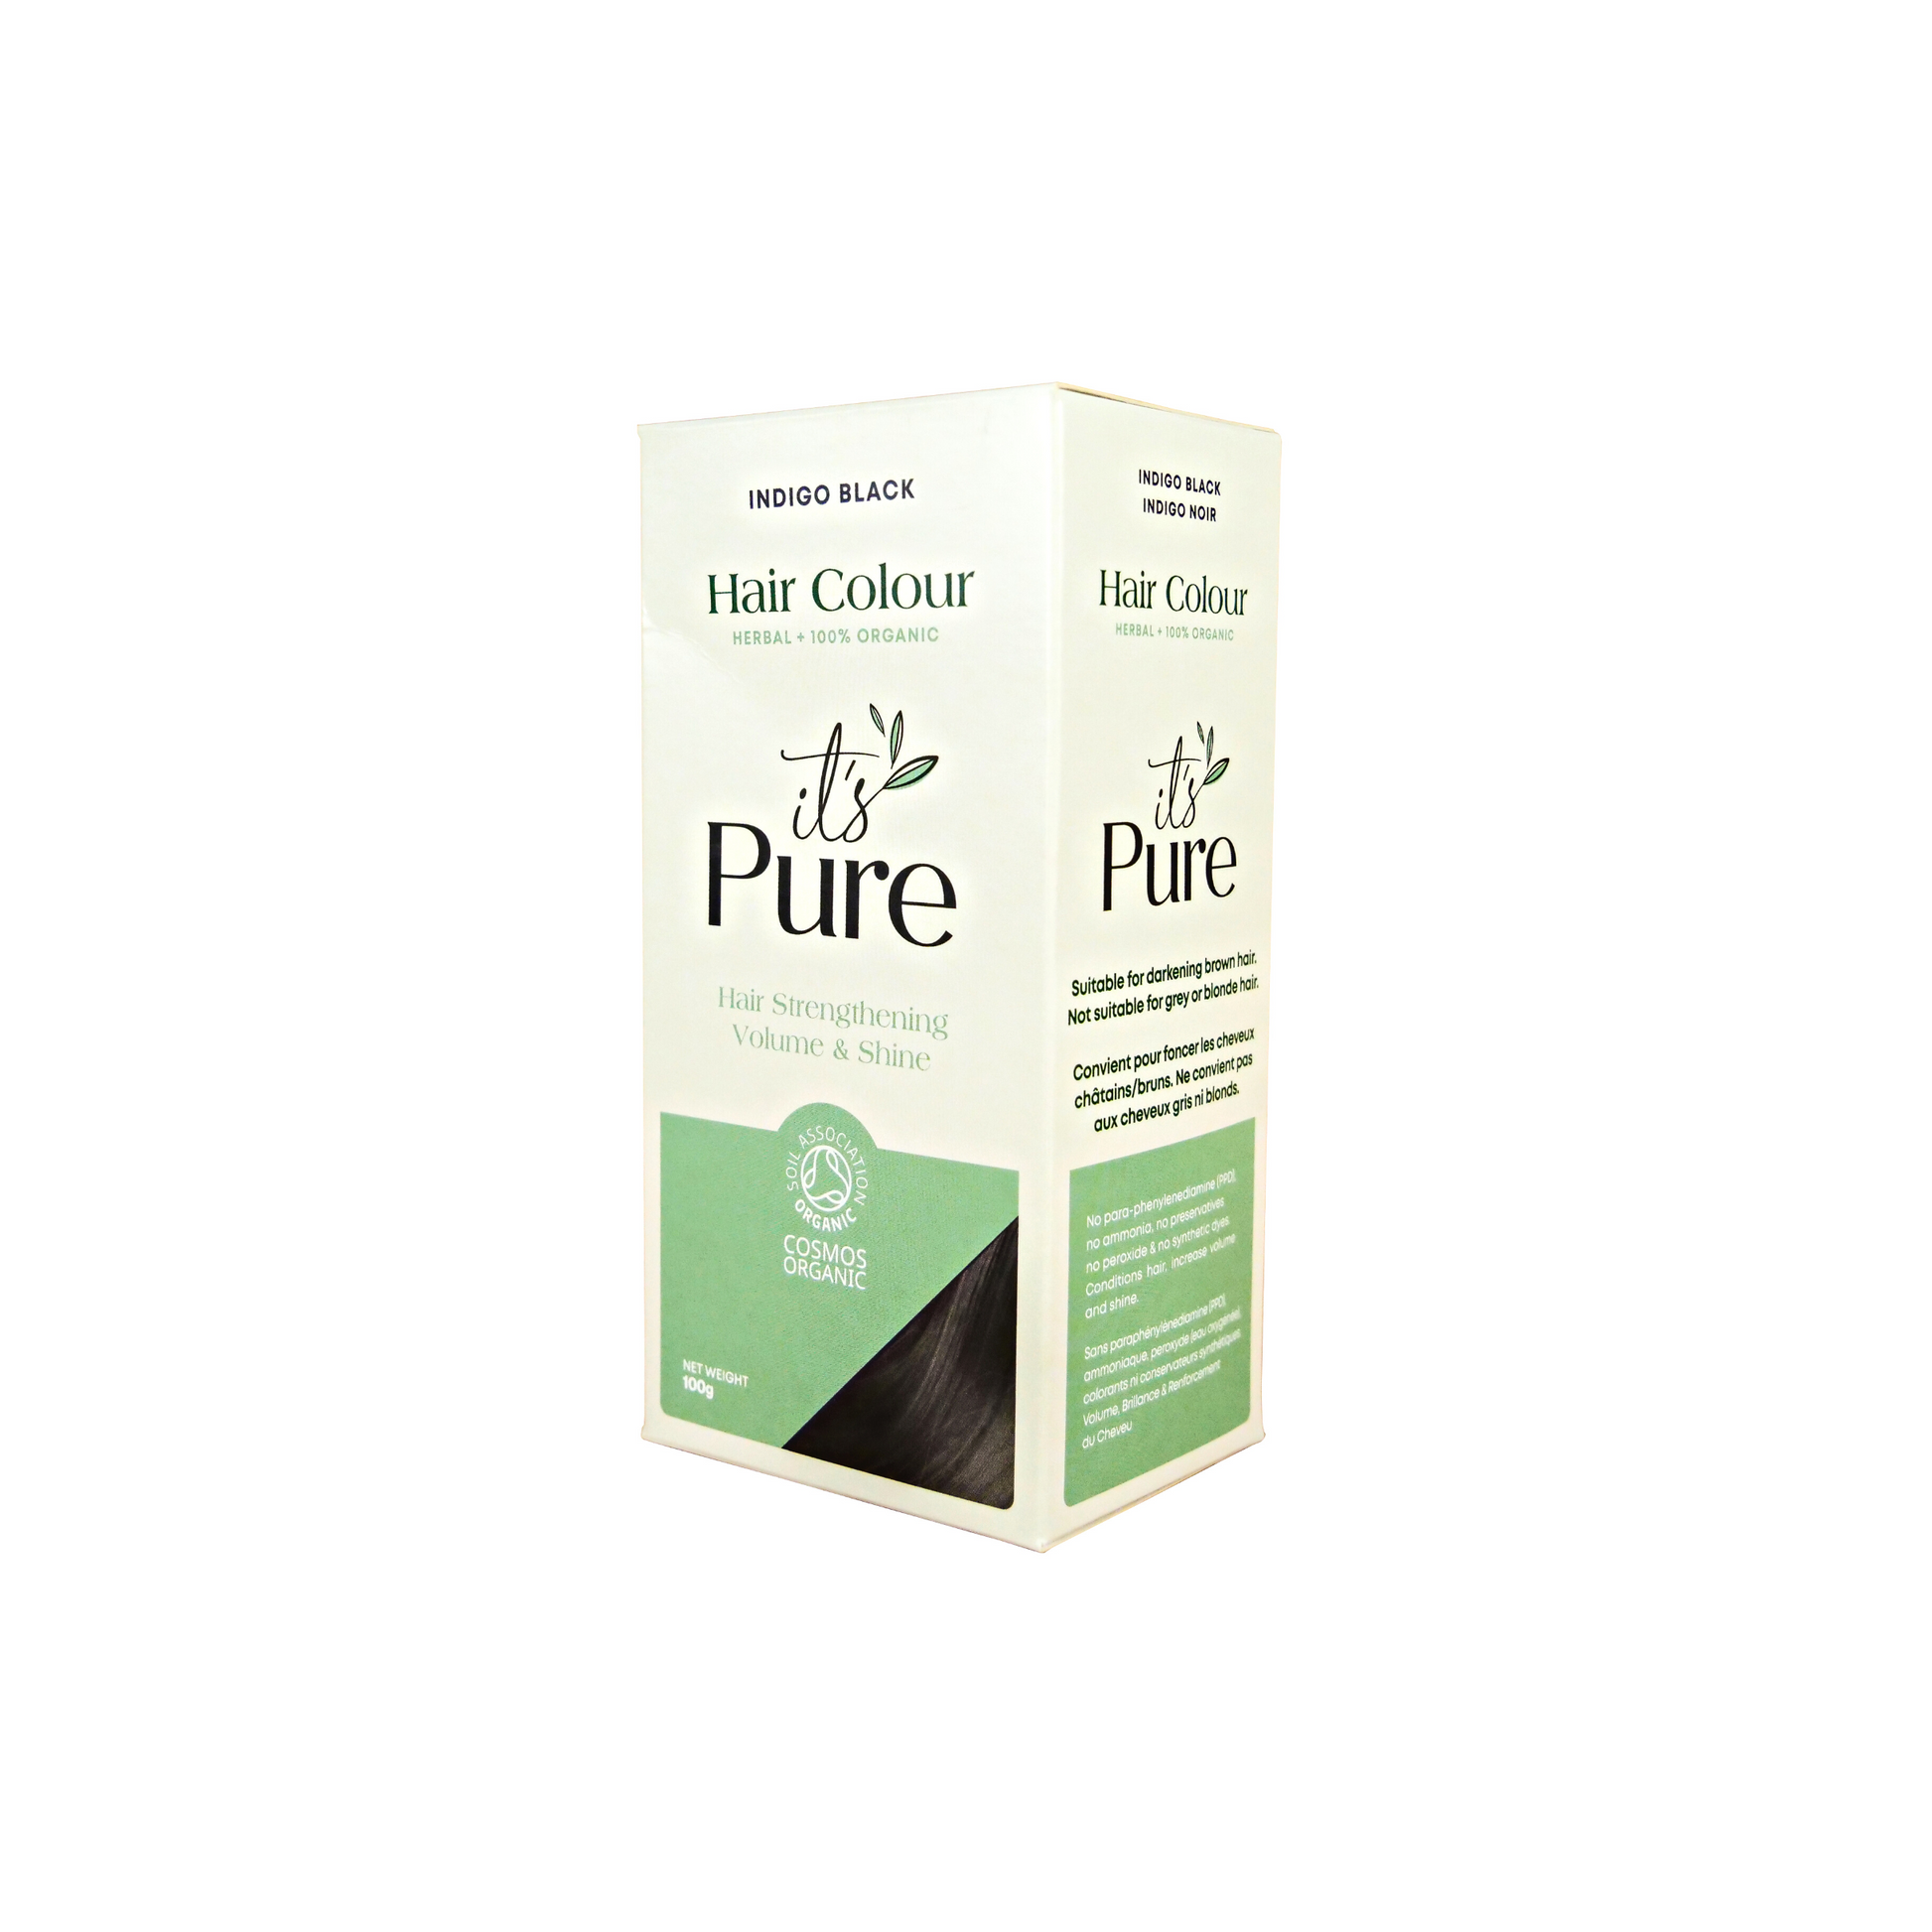 it's pure indigo black semi permanent natural hair dye in light green and green box on white background